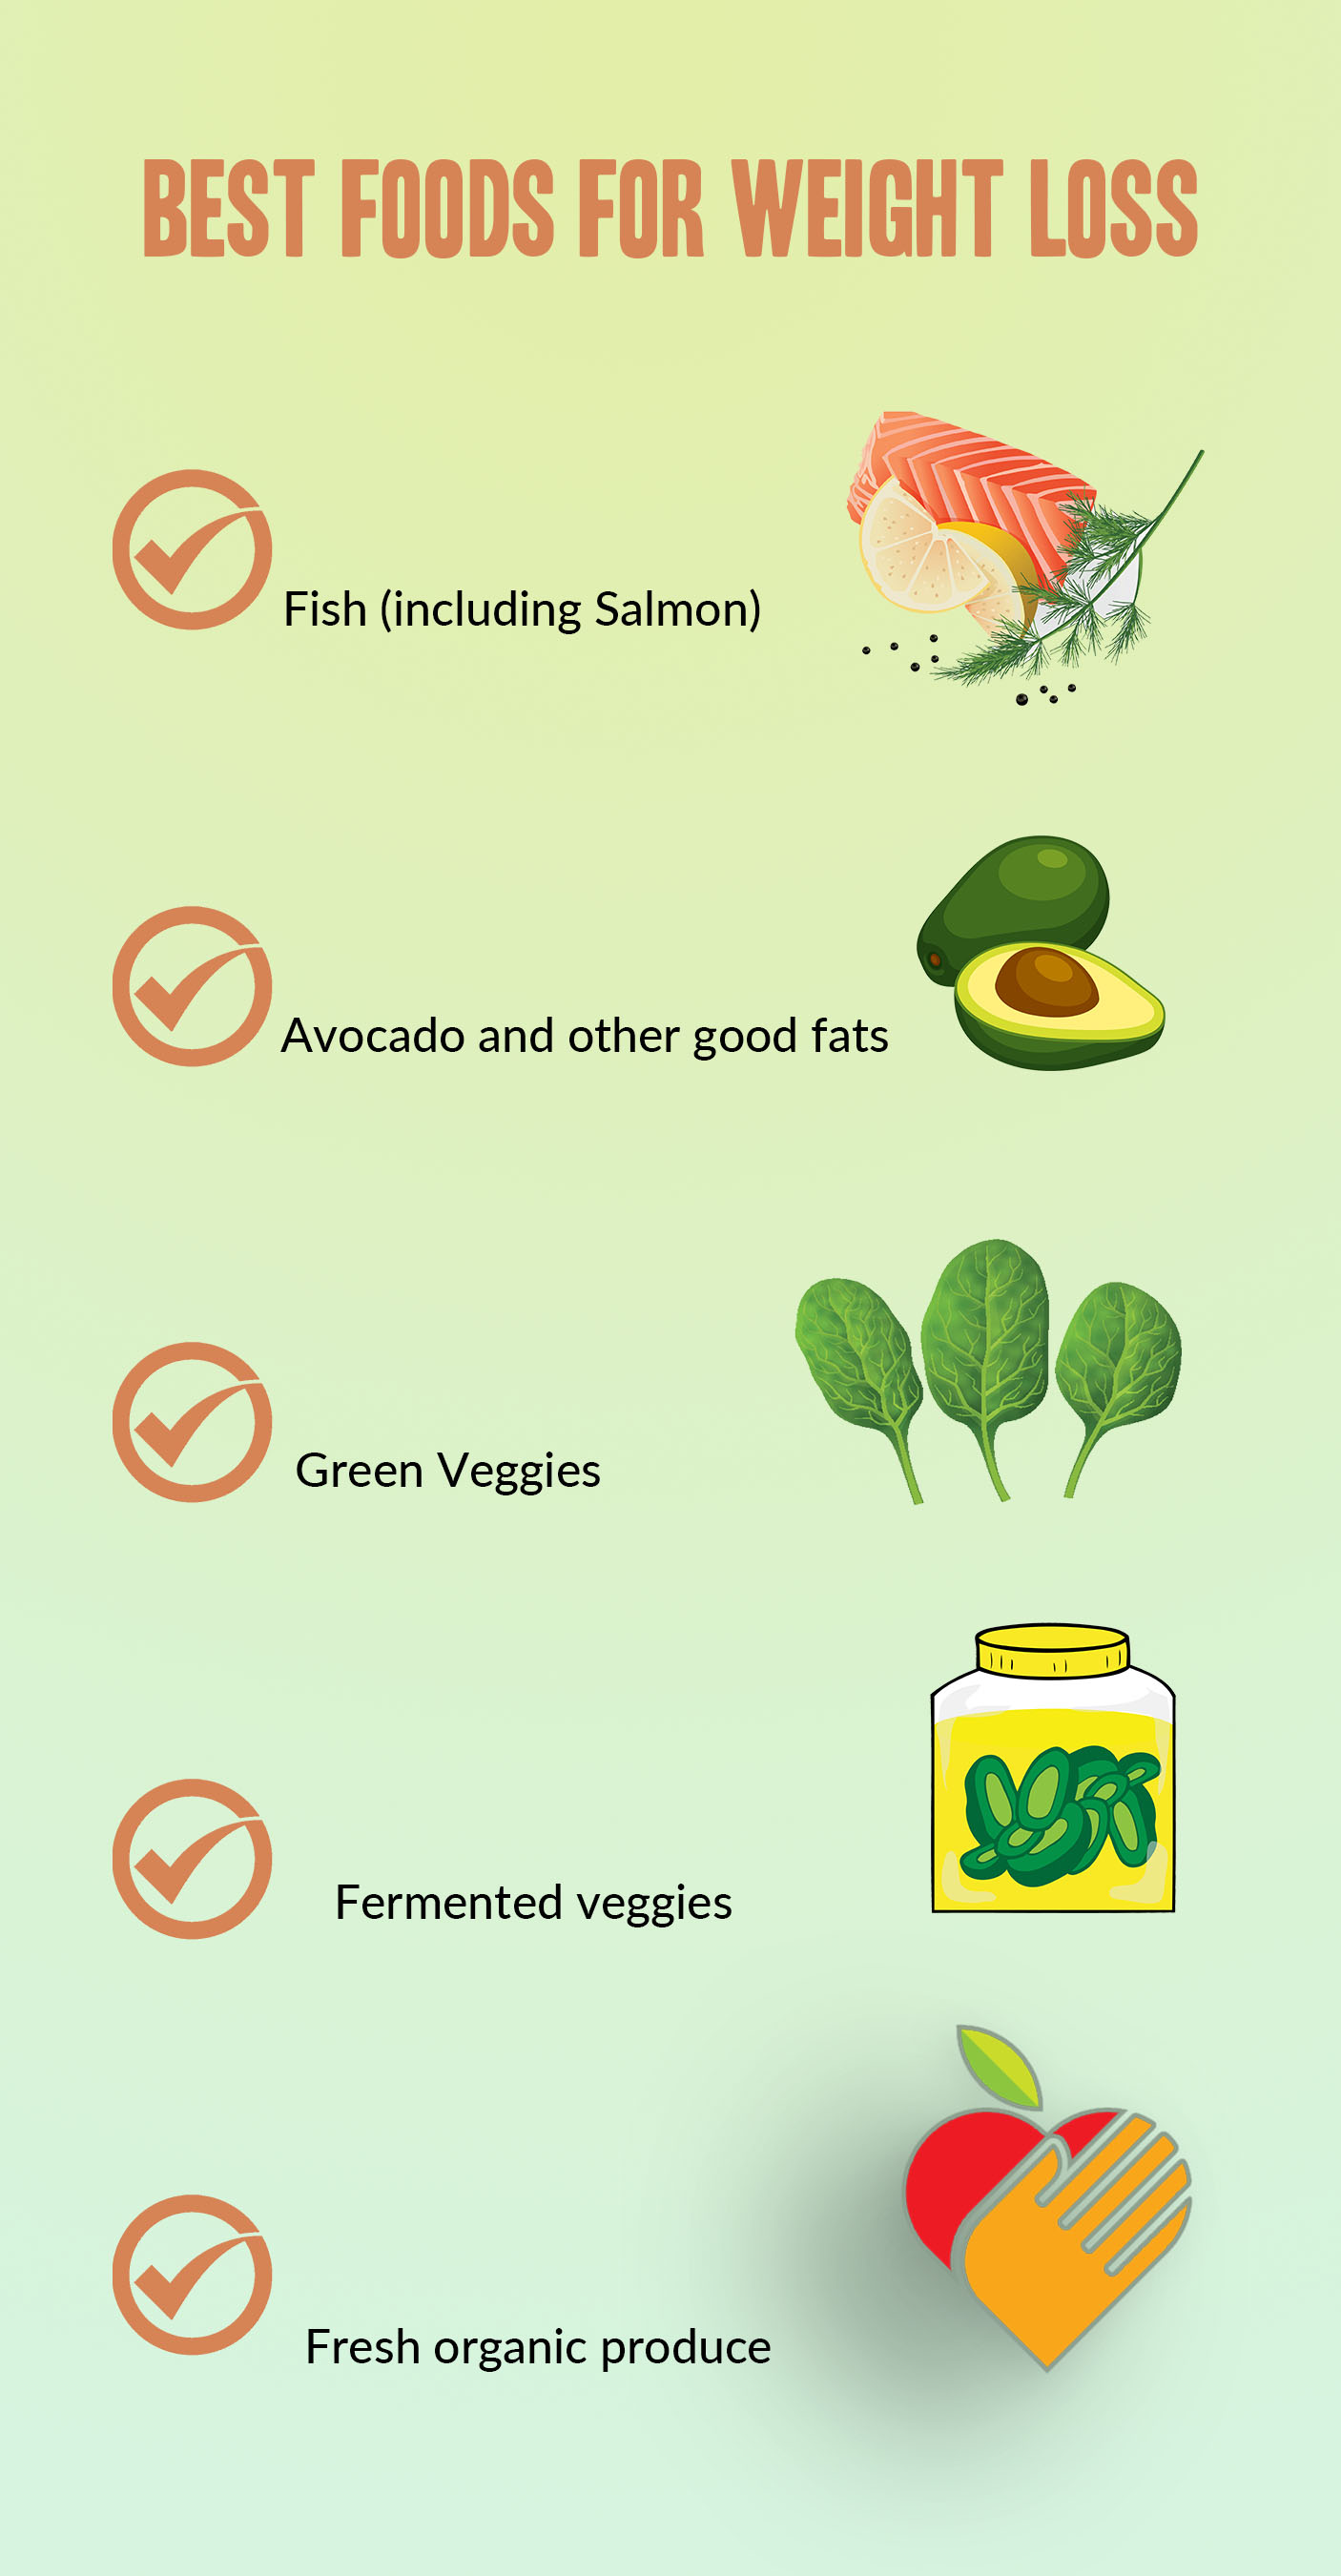 Top 10 Best Foods For Weight Loss